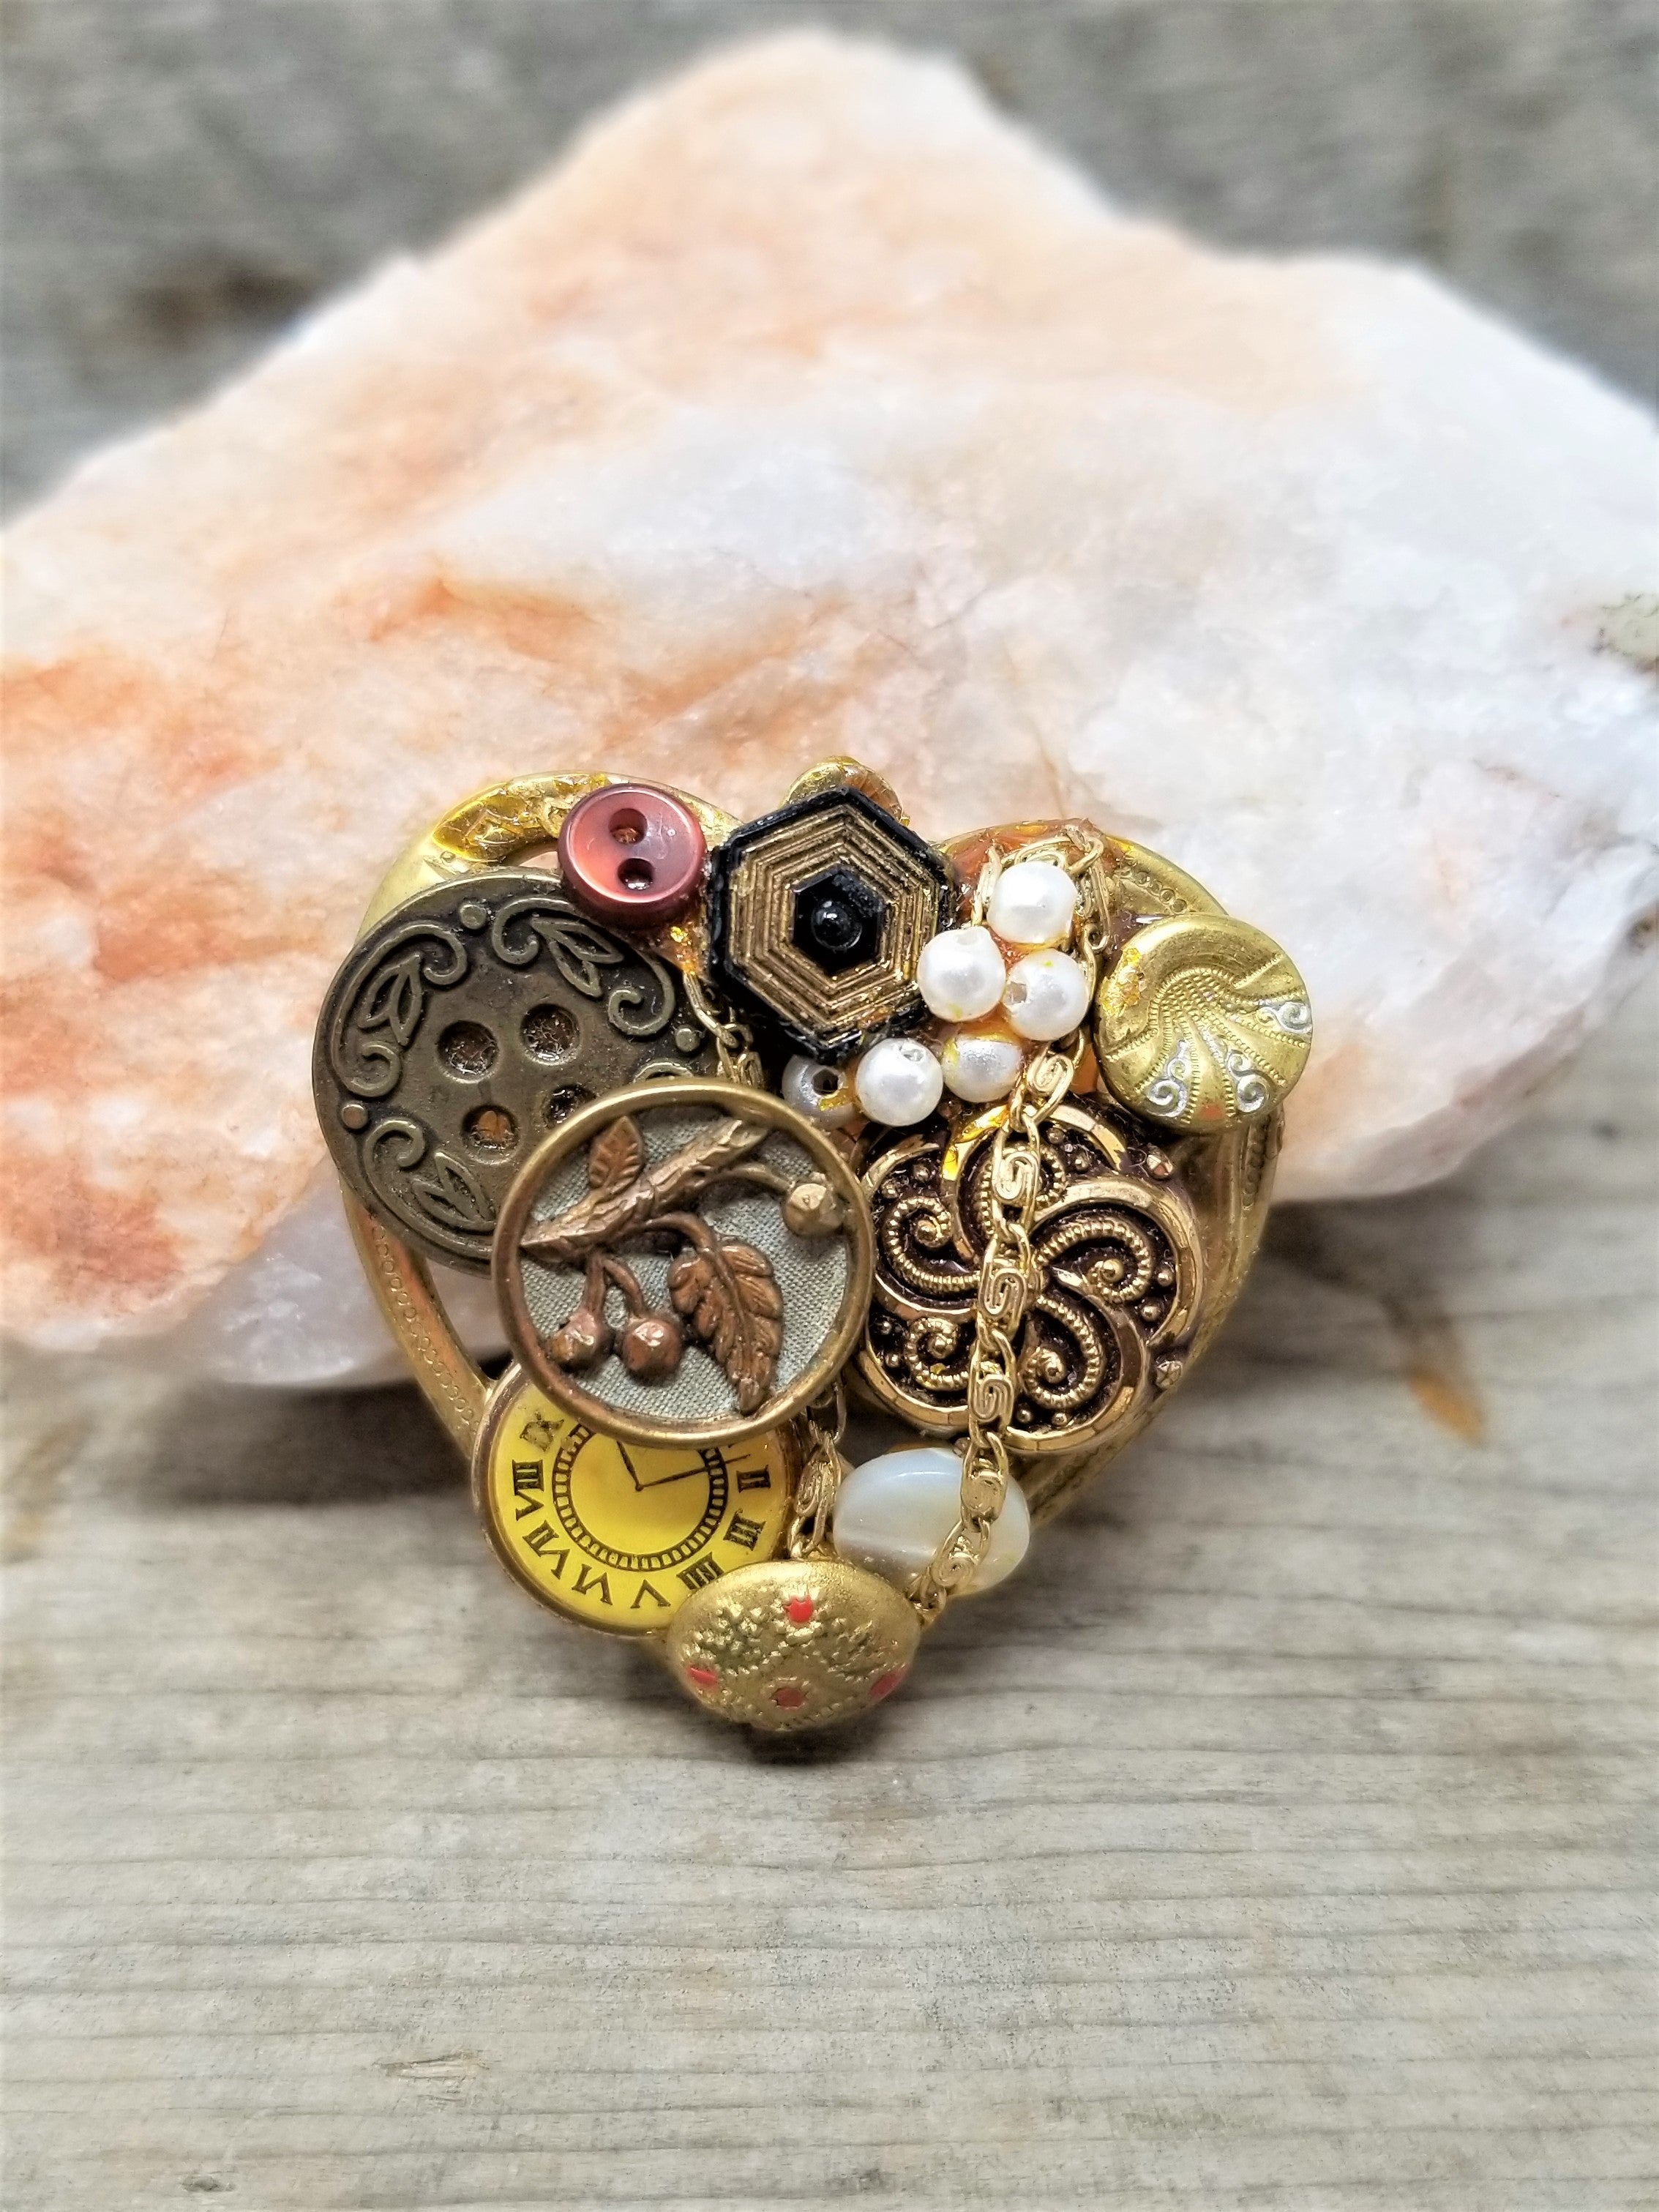 Adorable Handmade pin with Vintage Buttons